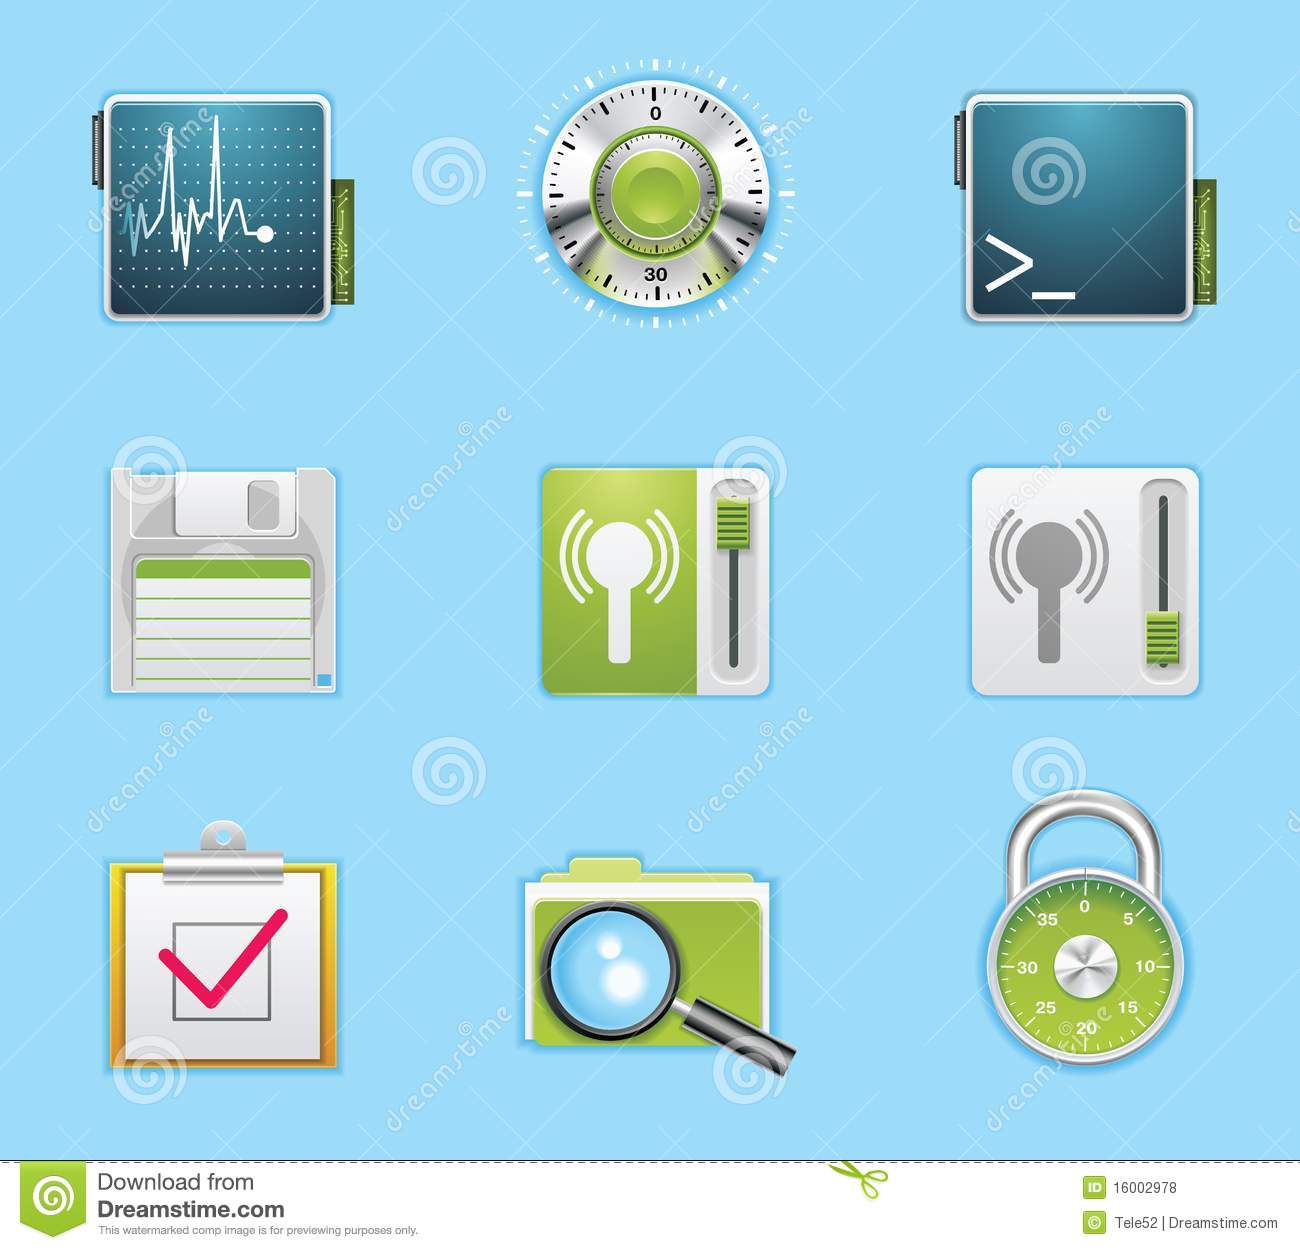 Royalty Free Application Icons